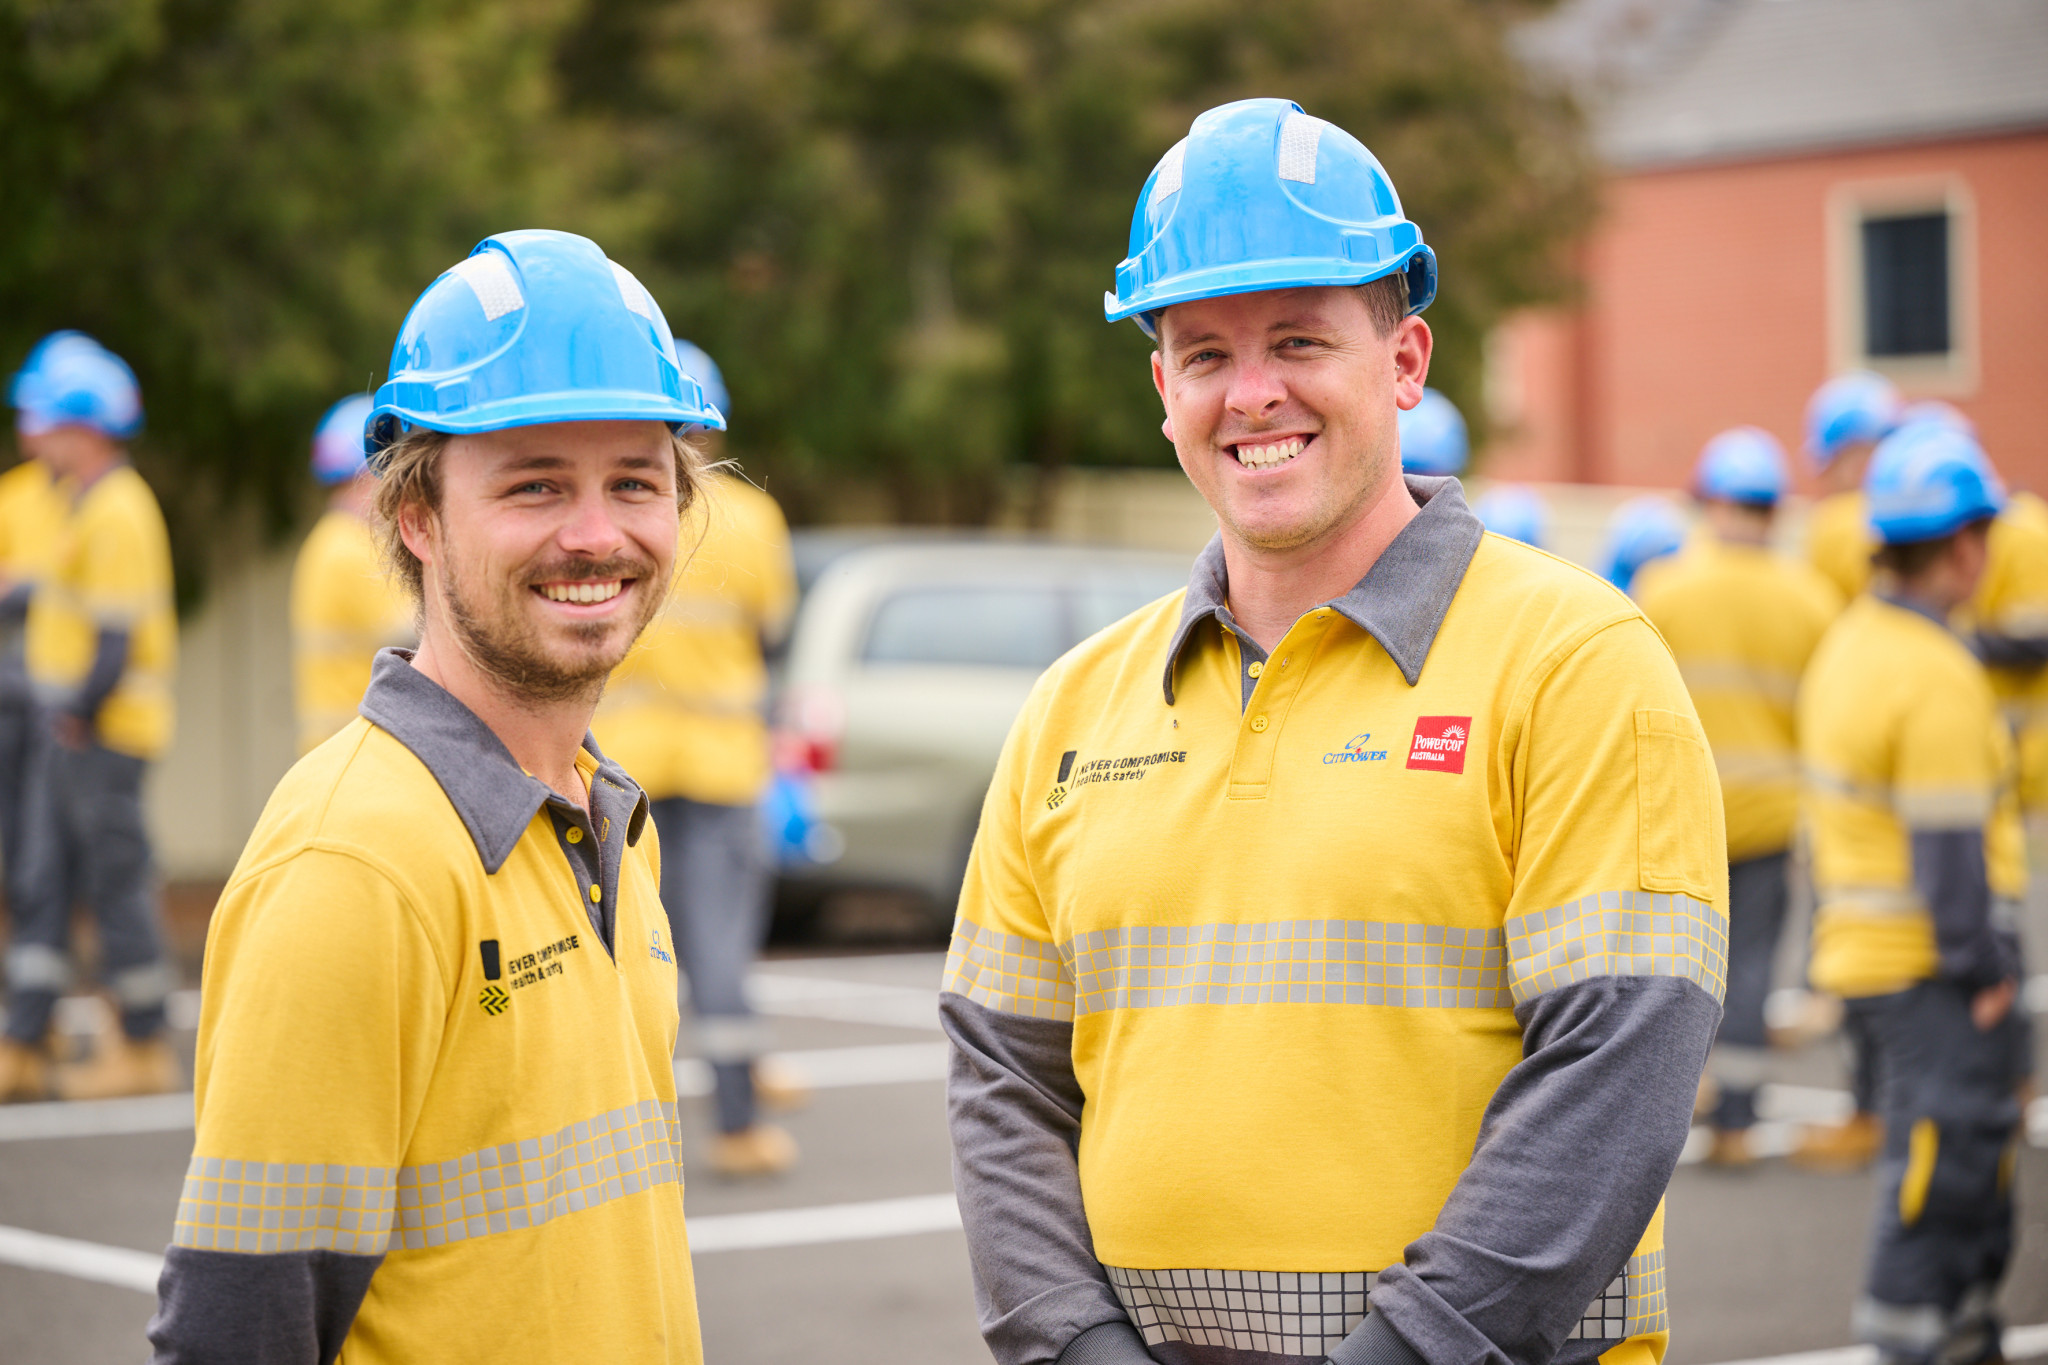 James Clifford and Jeremy Hartigan have joined the Horsham Powercor team.